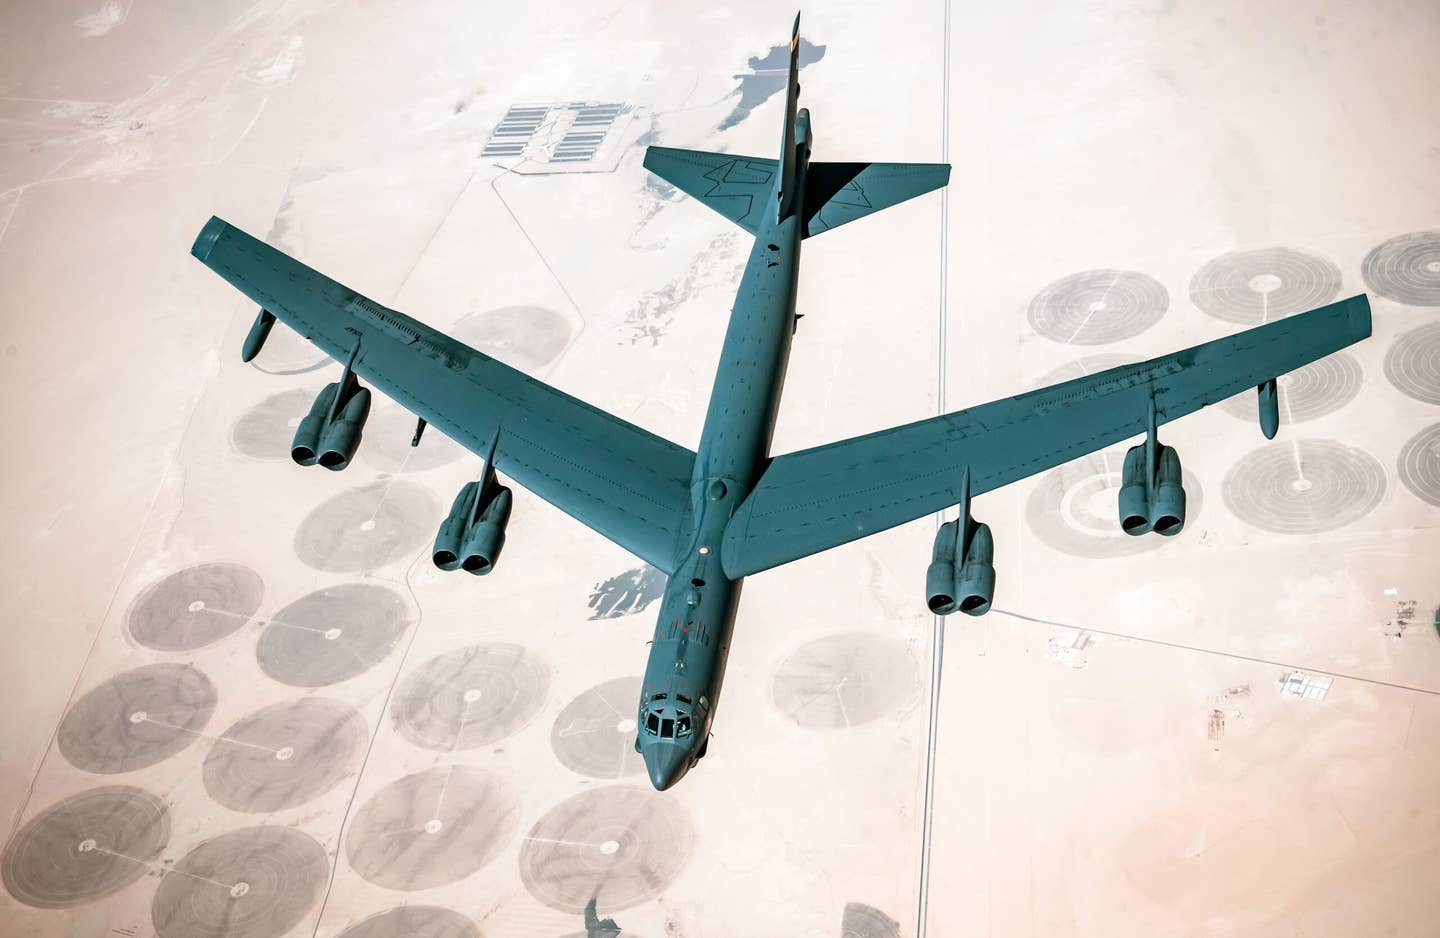 A U.S. Air Force B-52 Stratofortress from the 5th Bomb Wing, Minot Air Force Base, N.D., departs after receiving fuel from a U.S. Air Force KC-135 Stratotanker, its eight nacelles housing TF33 engines can be seen lining the wings. <em>Credit: U.S. Air Force photo by Staff Sgt. Trevor T. McBride</em>